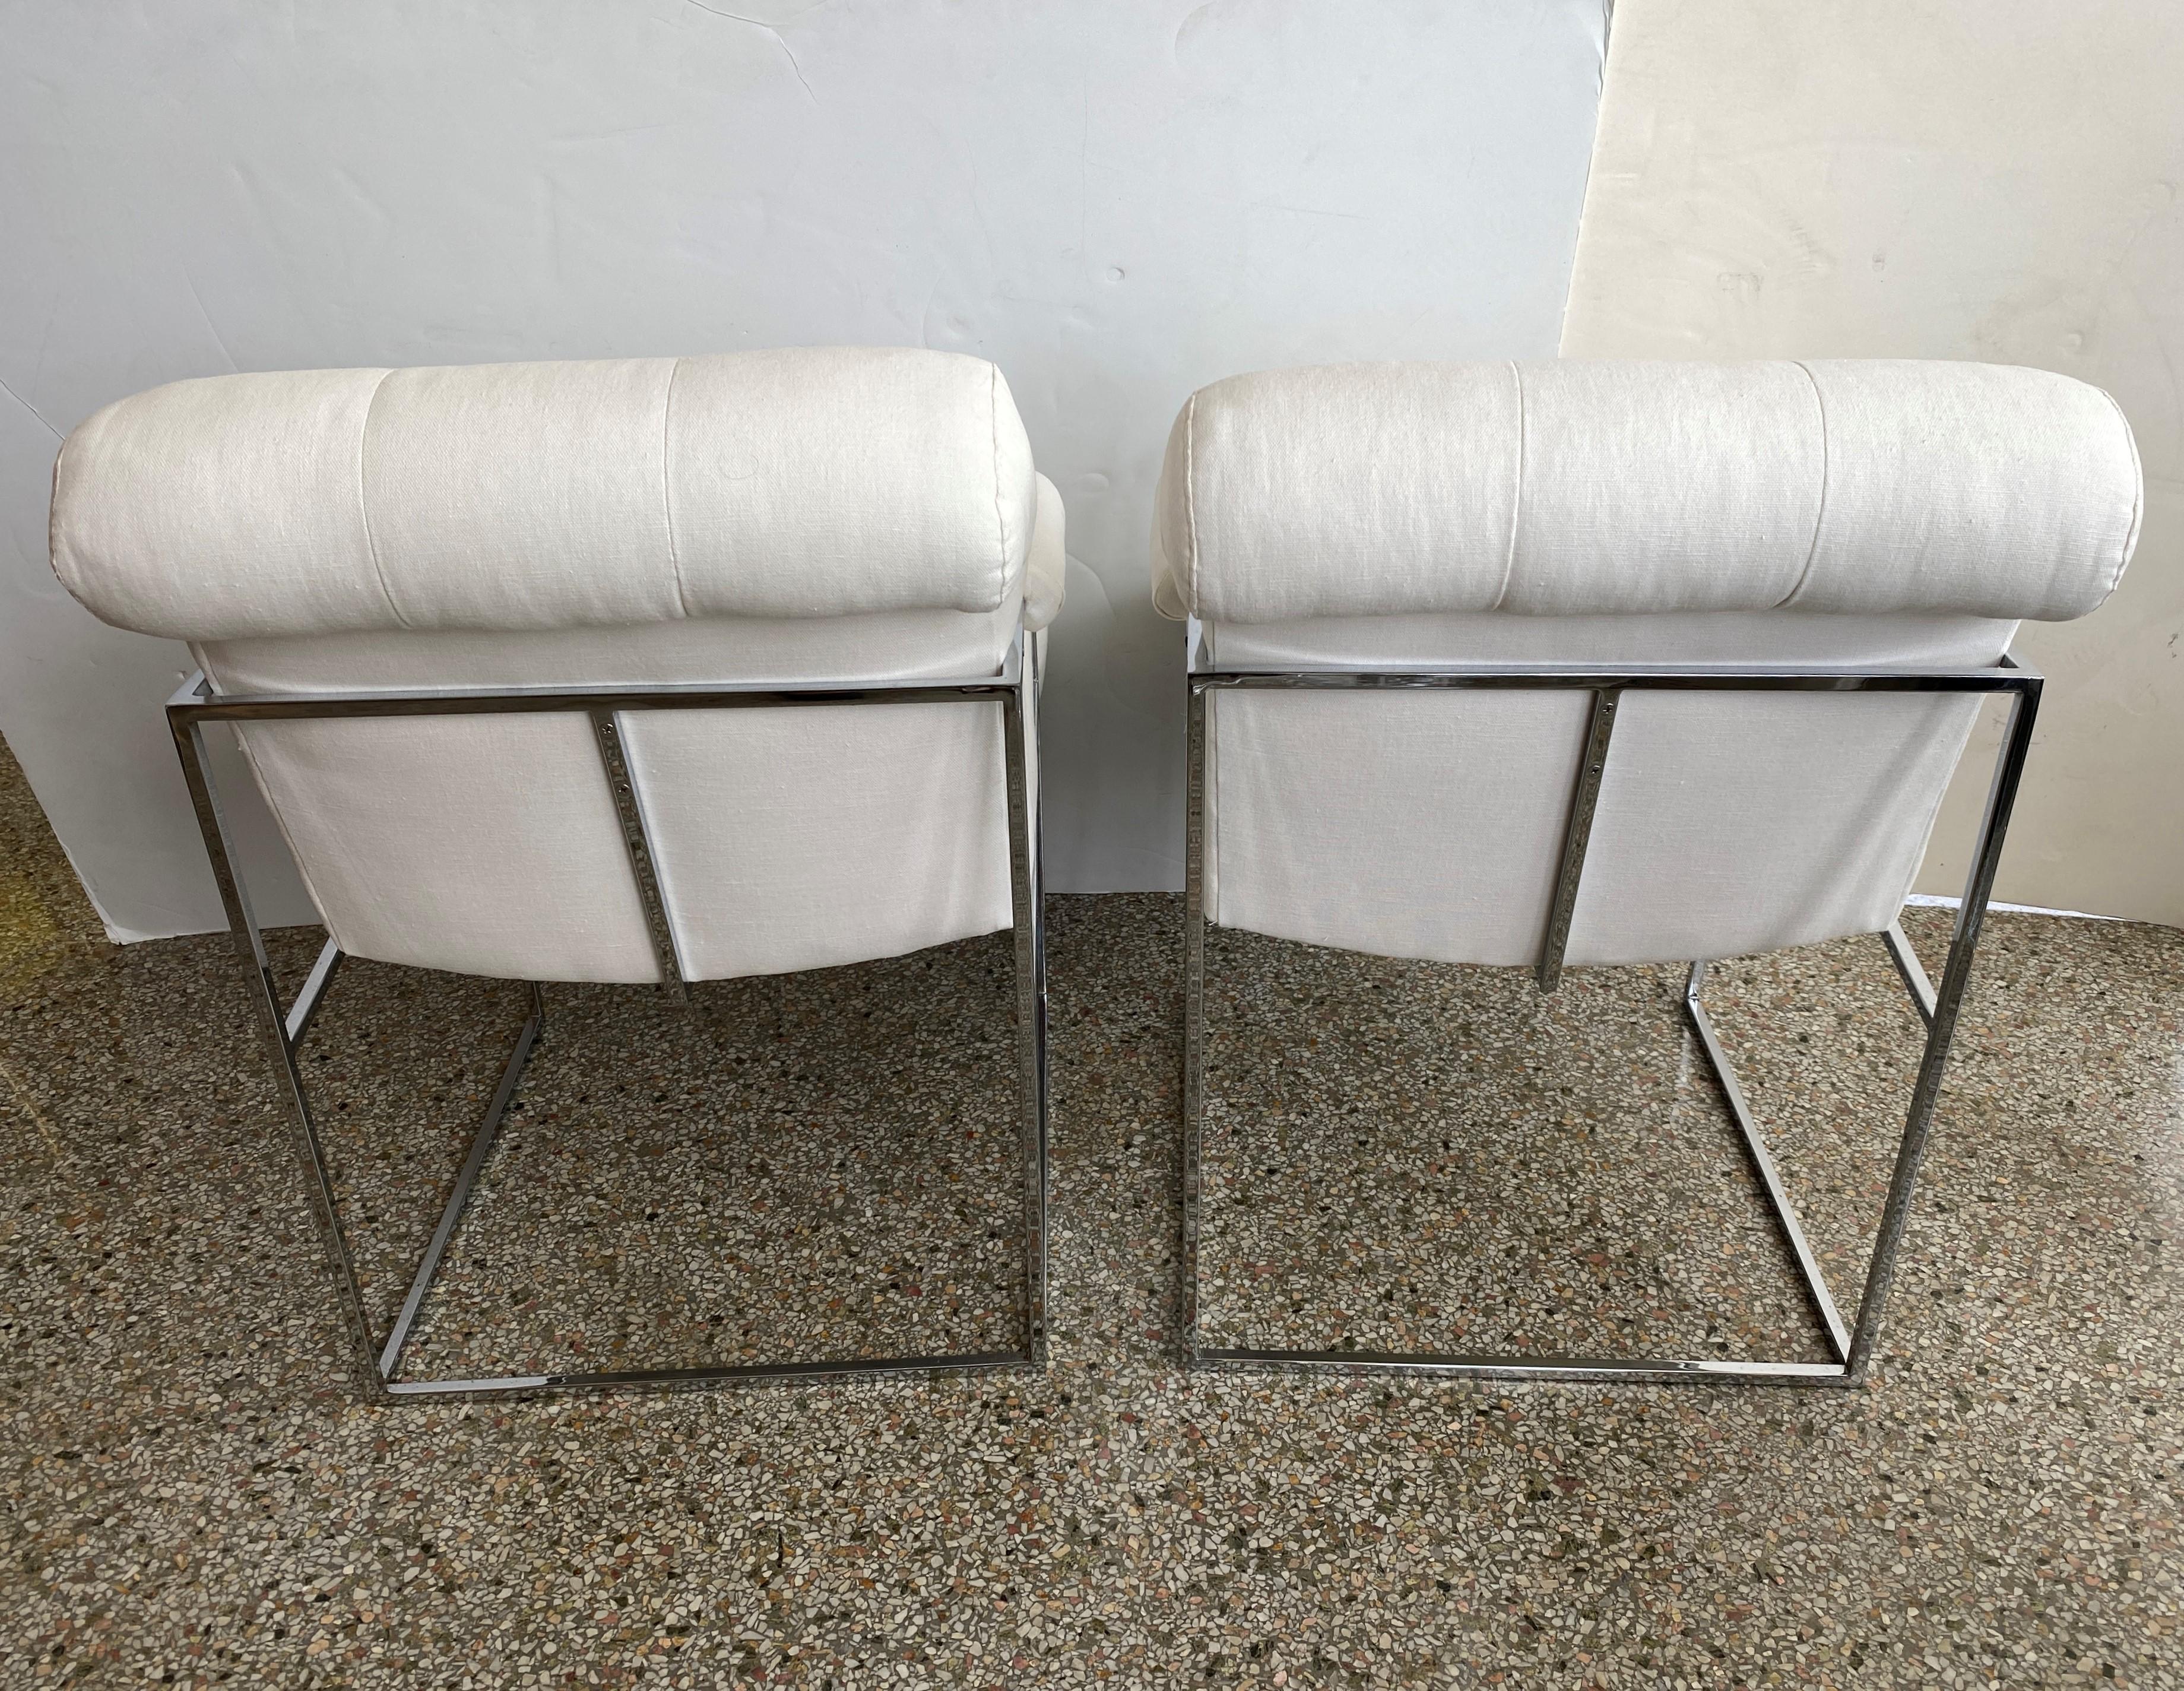 Pair of Milo Baughman Thin Line Chairs in Polished Chrome For Sale 3